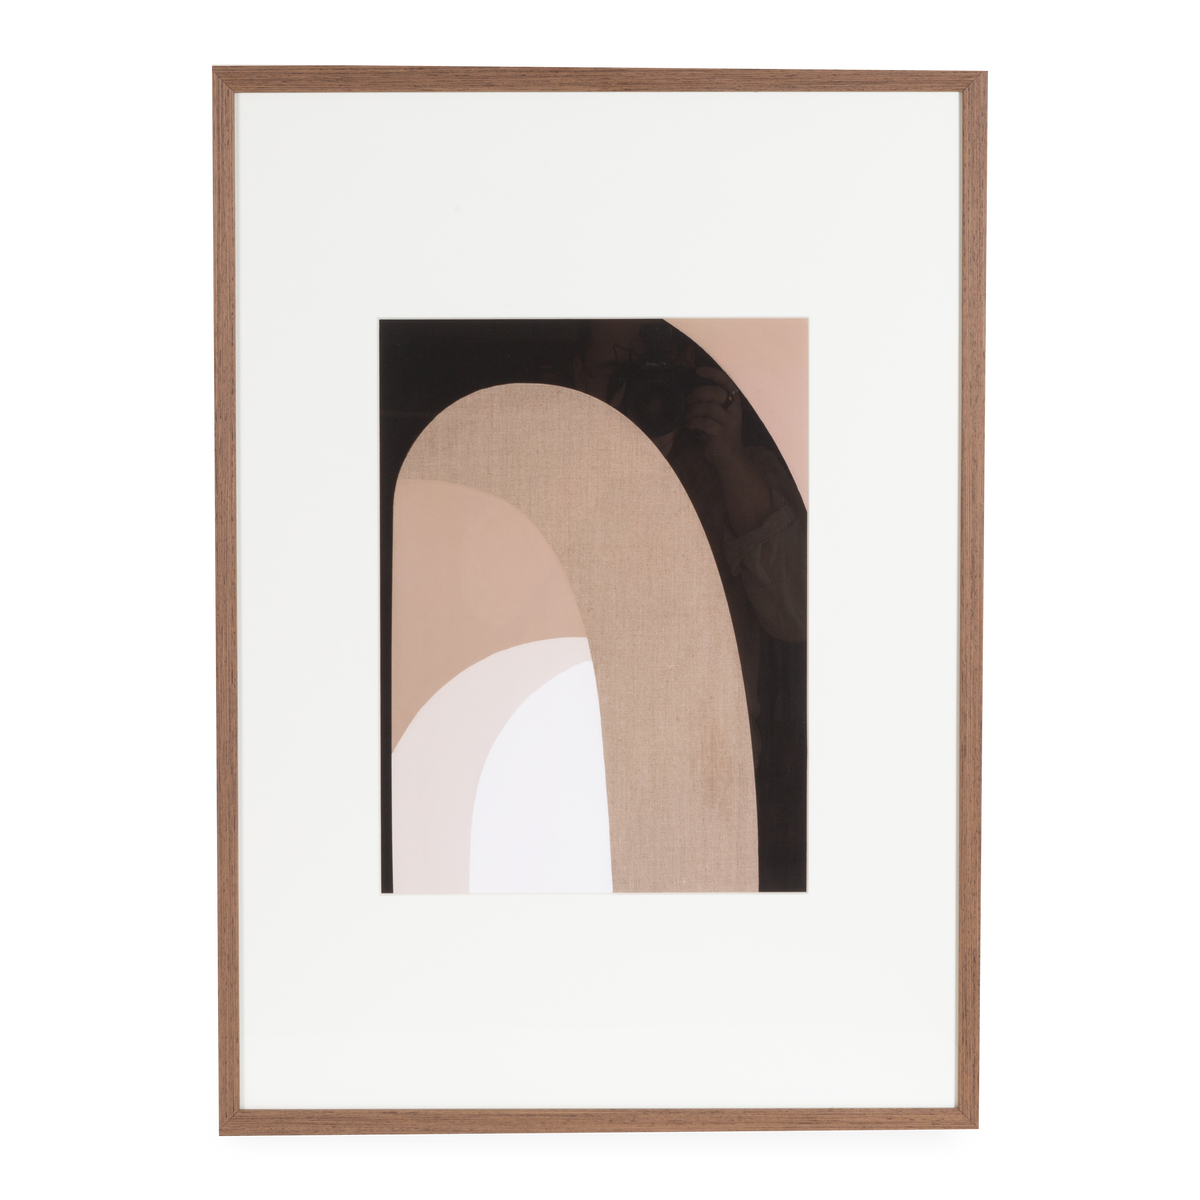 Combining elements of positive and negative space, The Arch 01 by Danish artist NatasjaLykke transports simple architectural elements and textural materials into this graphically r